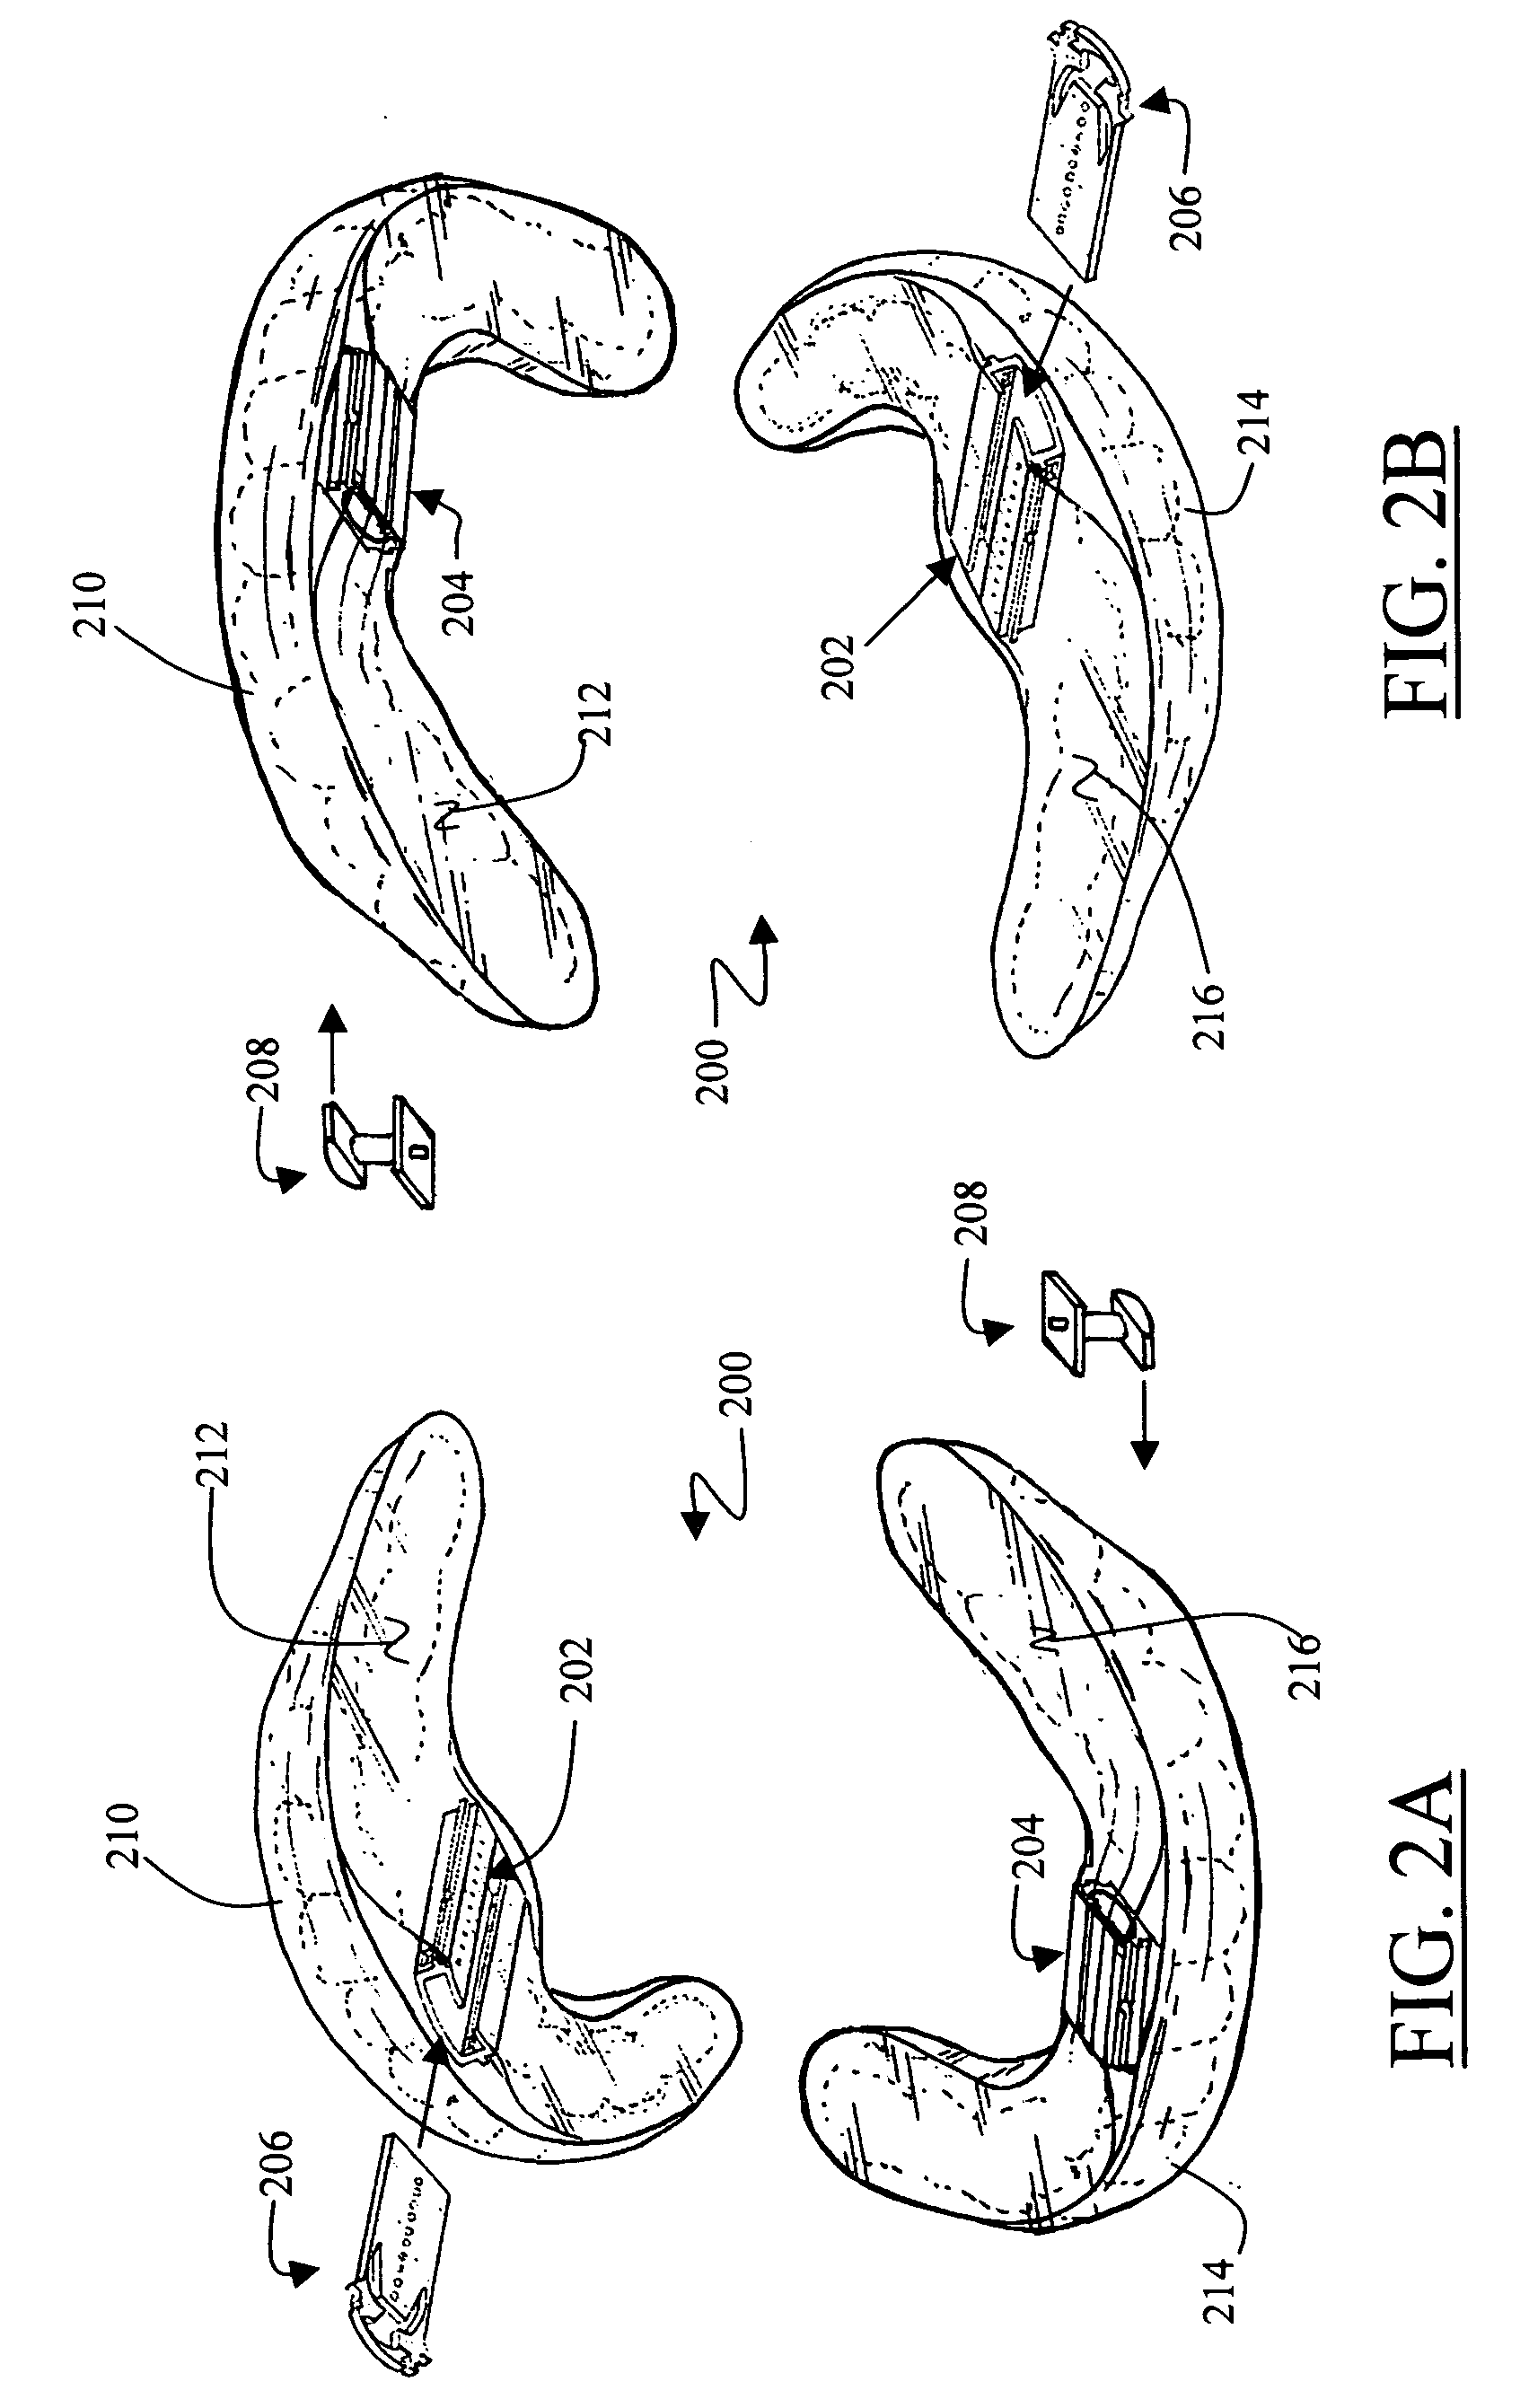 Apparatus and method for caring for obstructive sleep disorder breathing